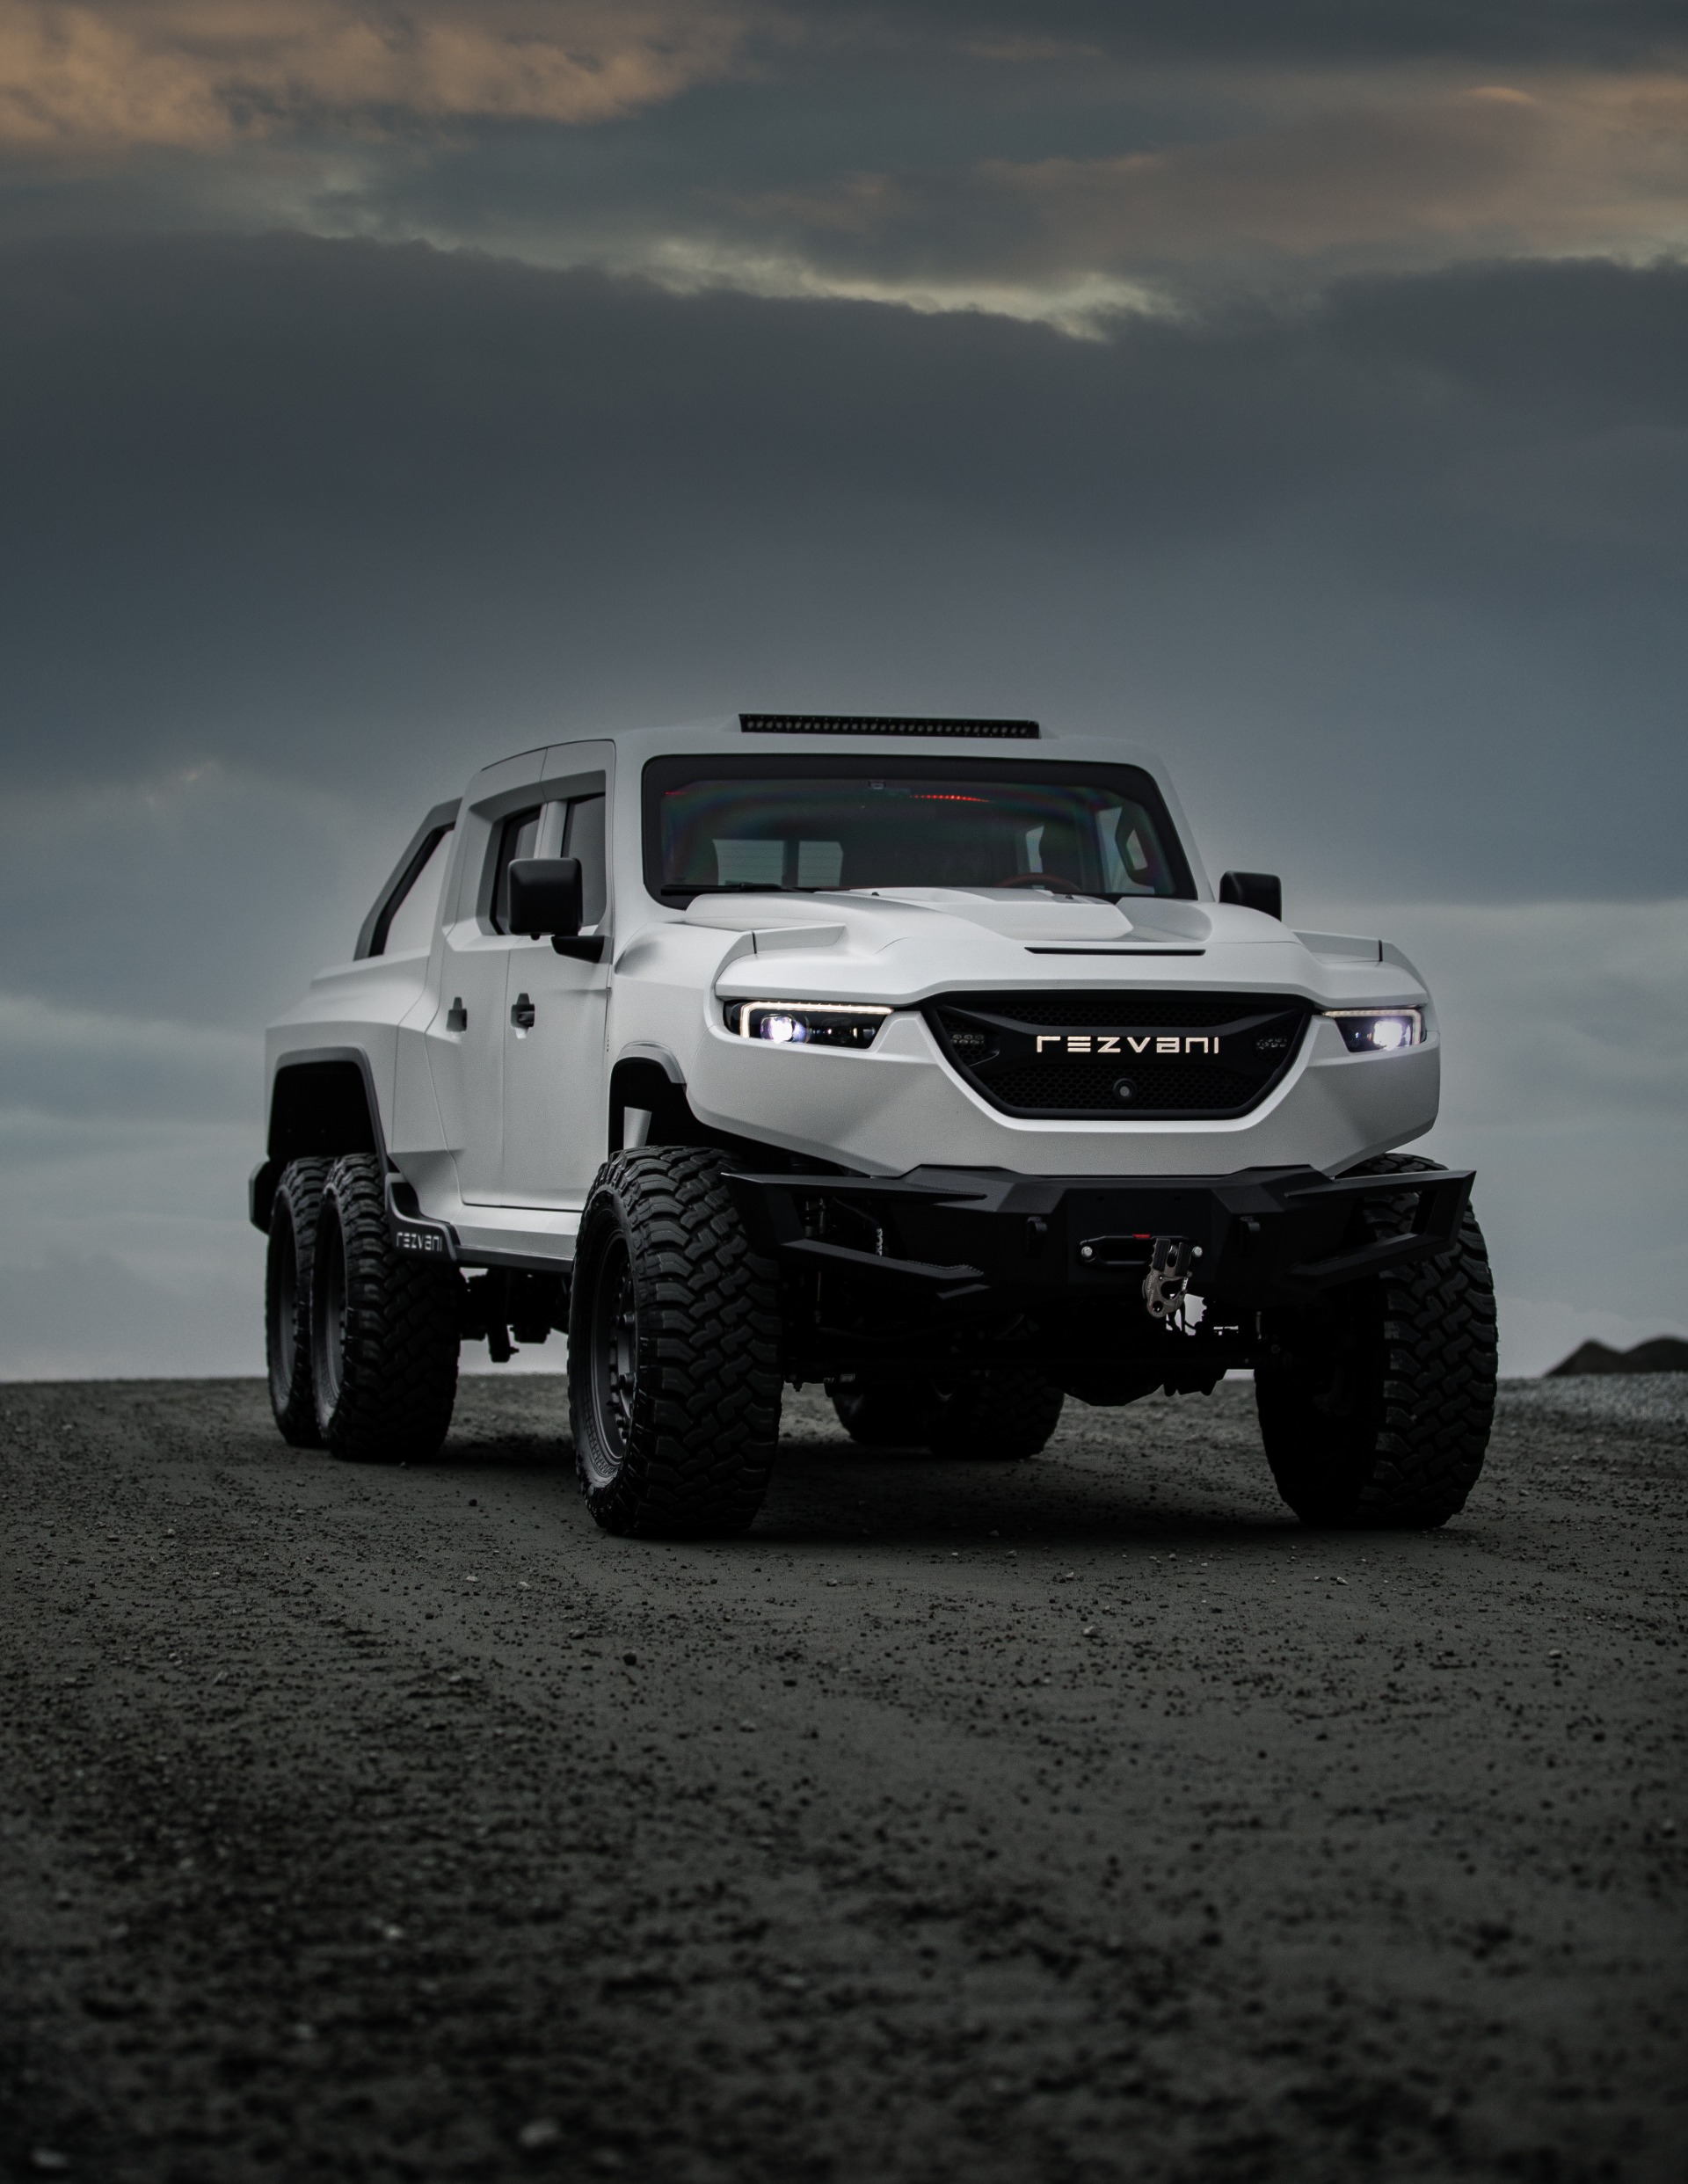 Used-2021-Rezvani-Hercules-MILITARY-EDITION-6X6-Only-2K-Miles-OVER-164K-in-Option-Bulletproof